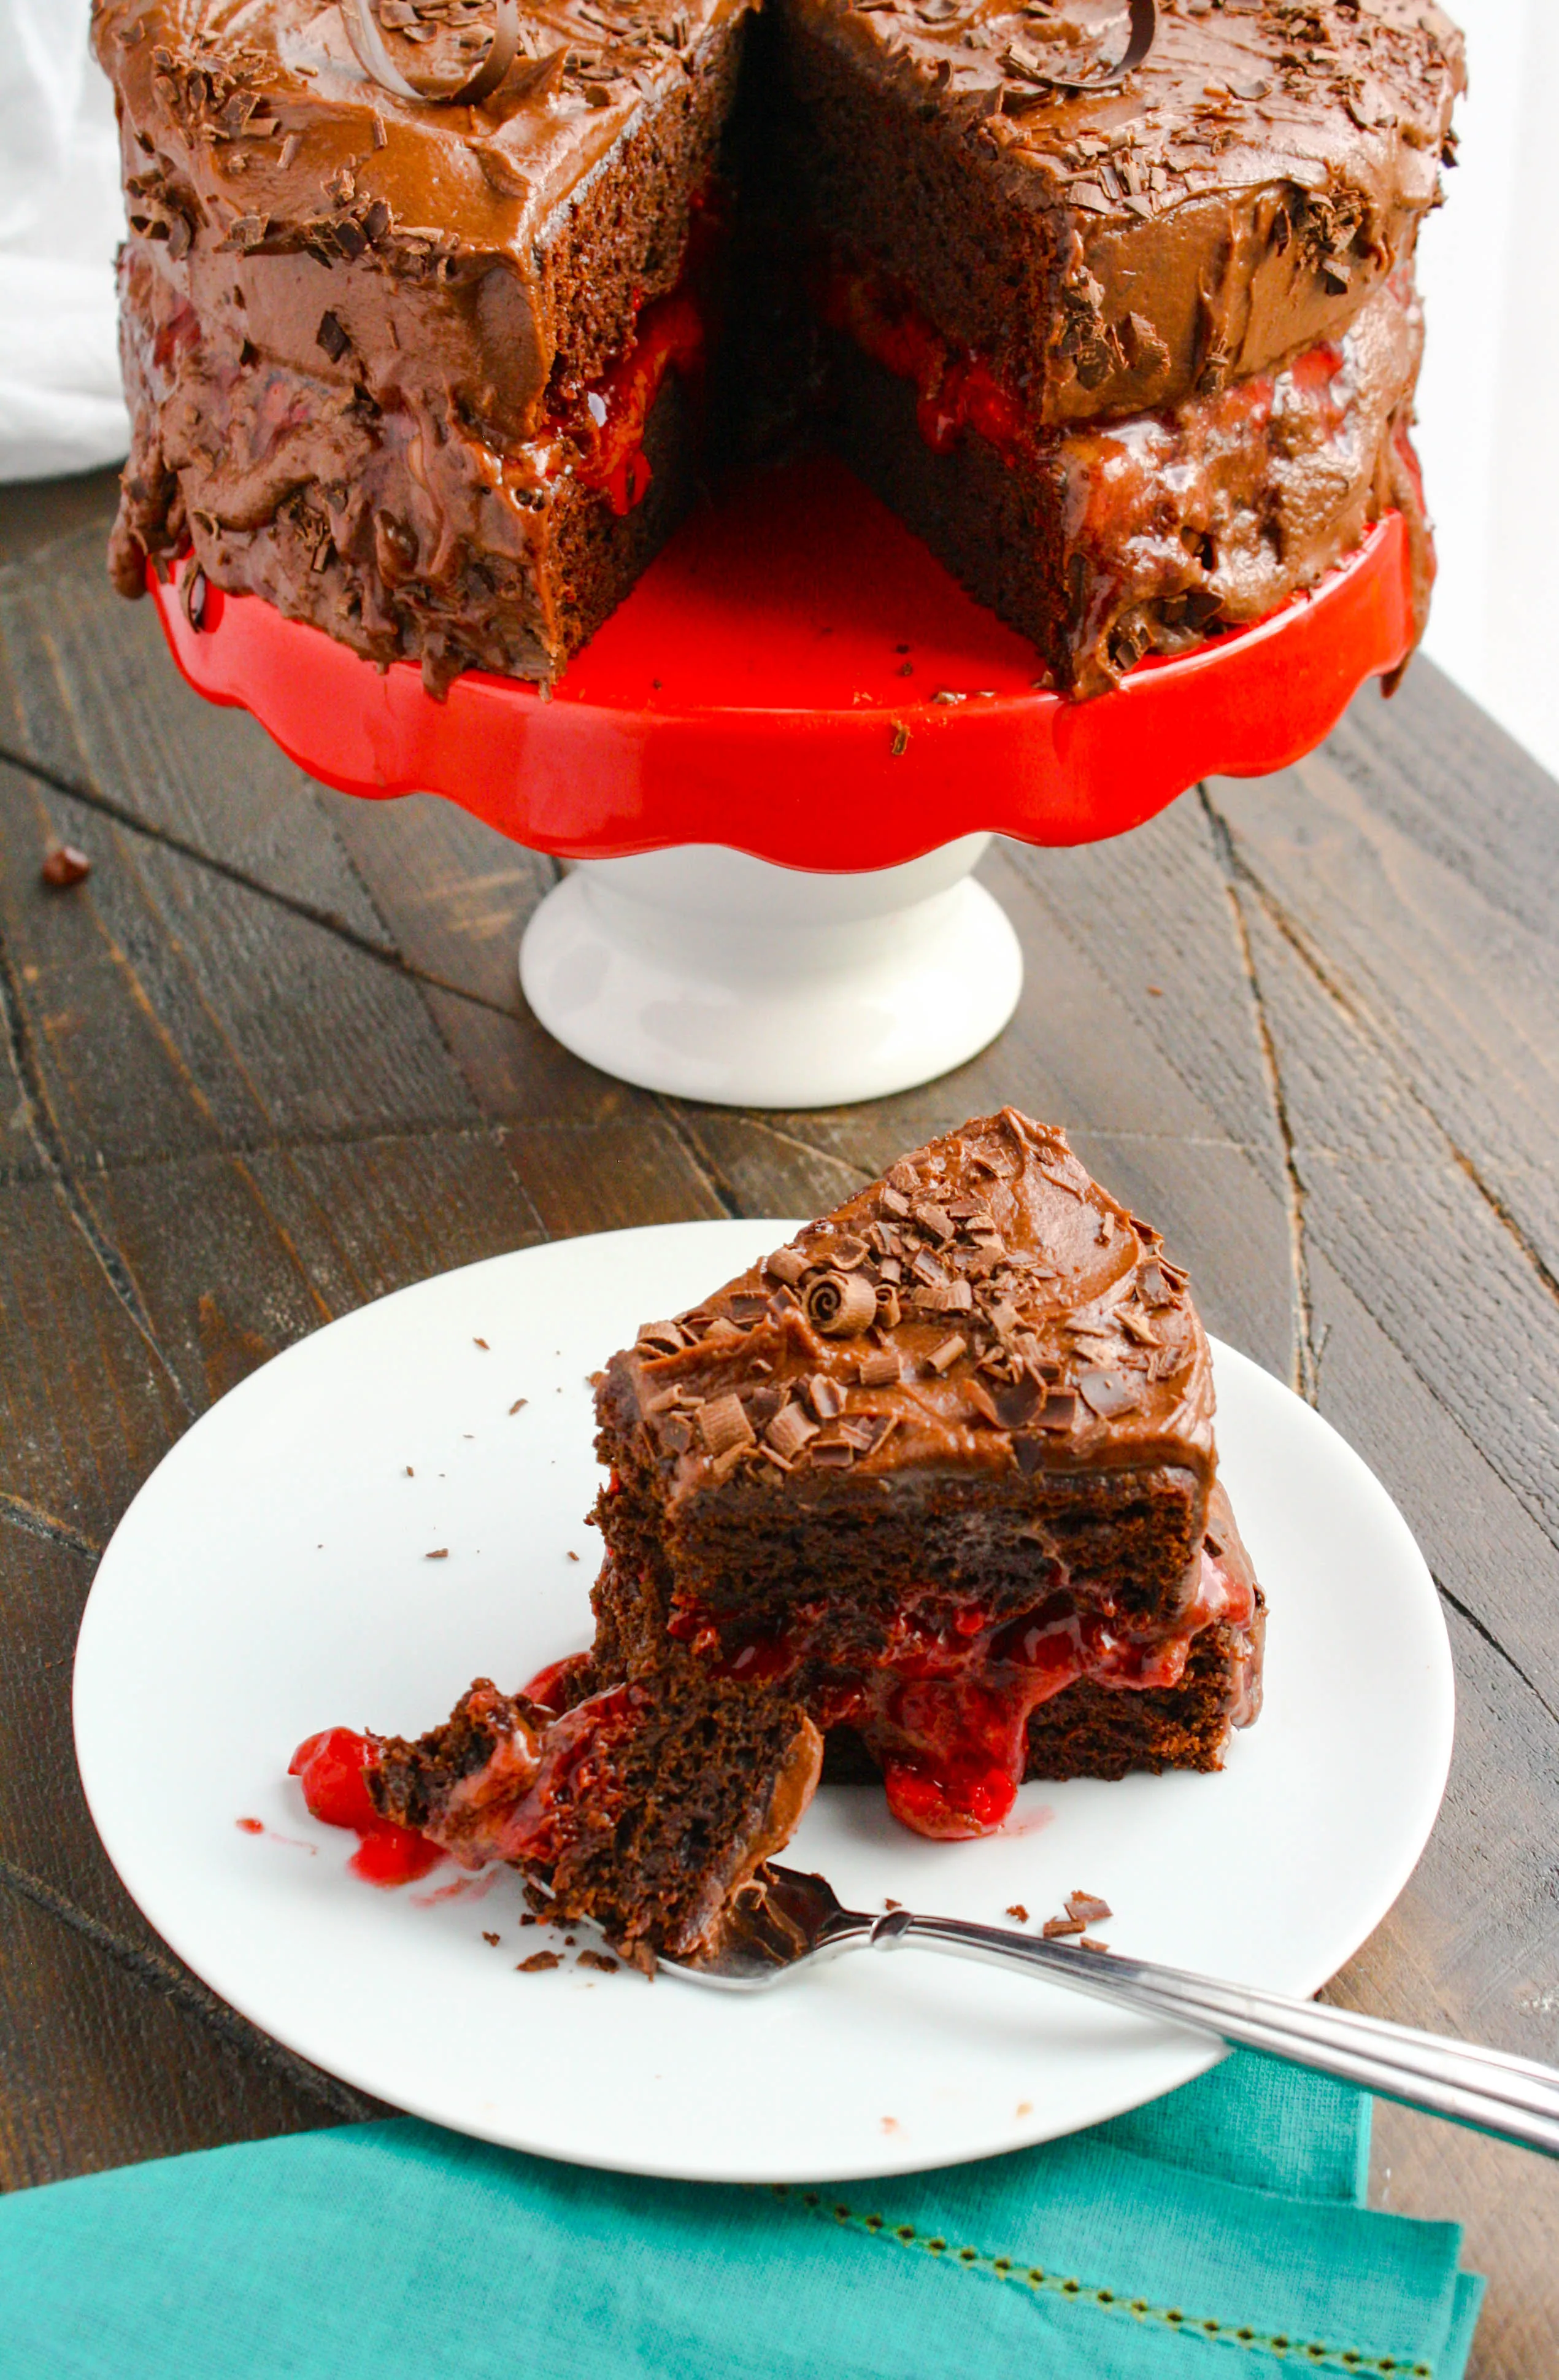 Chocolate Salad Dressing Cake with Cherries and Chocolate Buttercream Frosting is such a treat for a special occasion dessert. Chocolate Salad Dressing Cake with Cherries and Chocolate Buttercream Frosting is a lovely dessert.